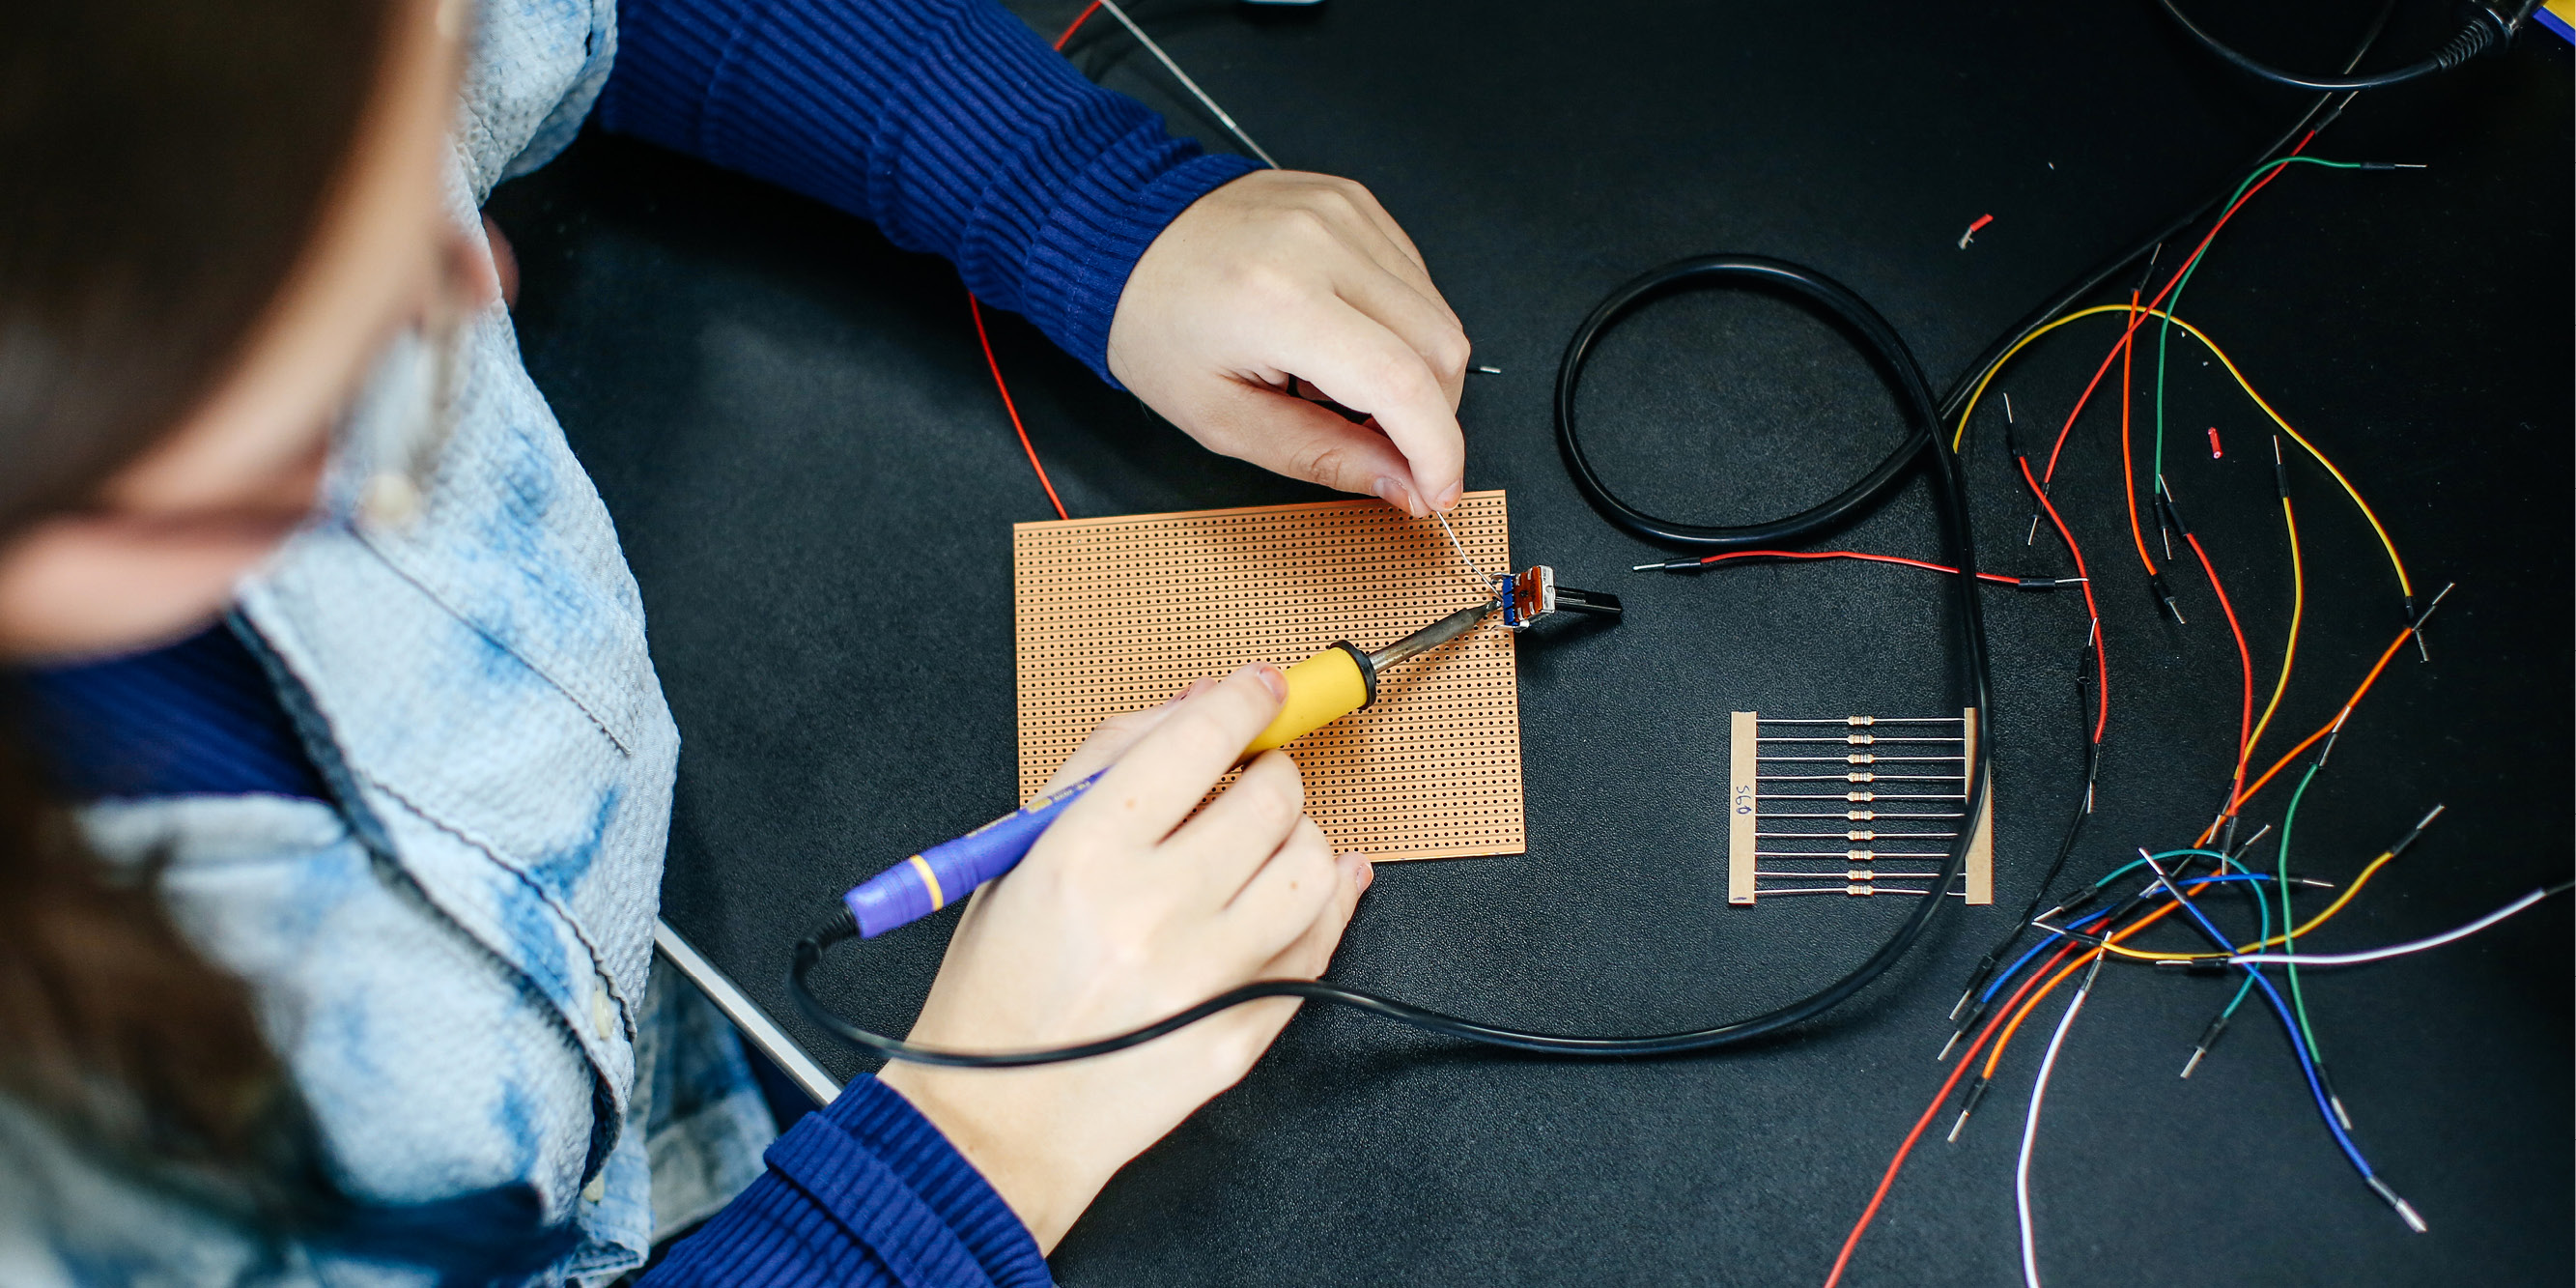 Image of Lucie Brosson soldering